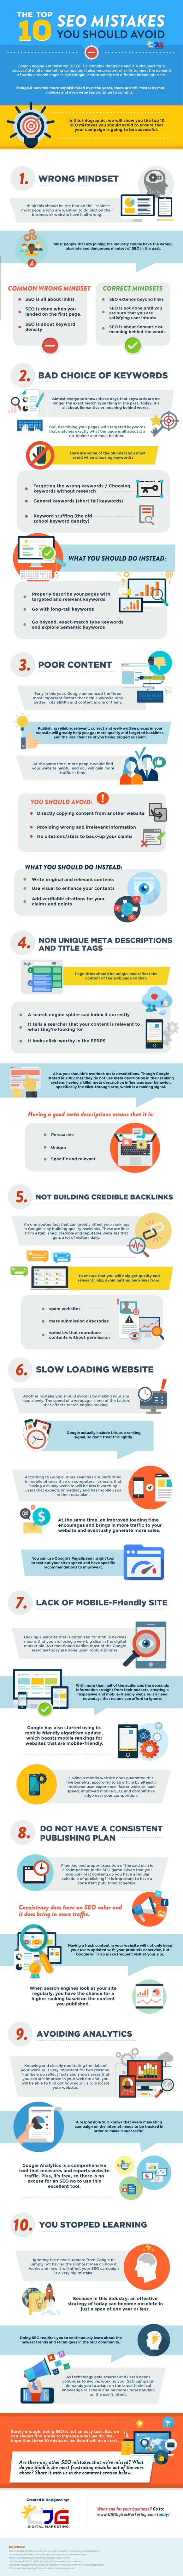 The Top 10 SEO Mistakes You Should Avoid (Infographic) - An Infographic from CJG Digital Marketing